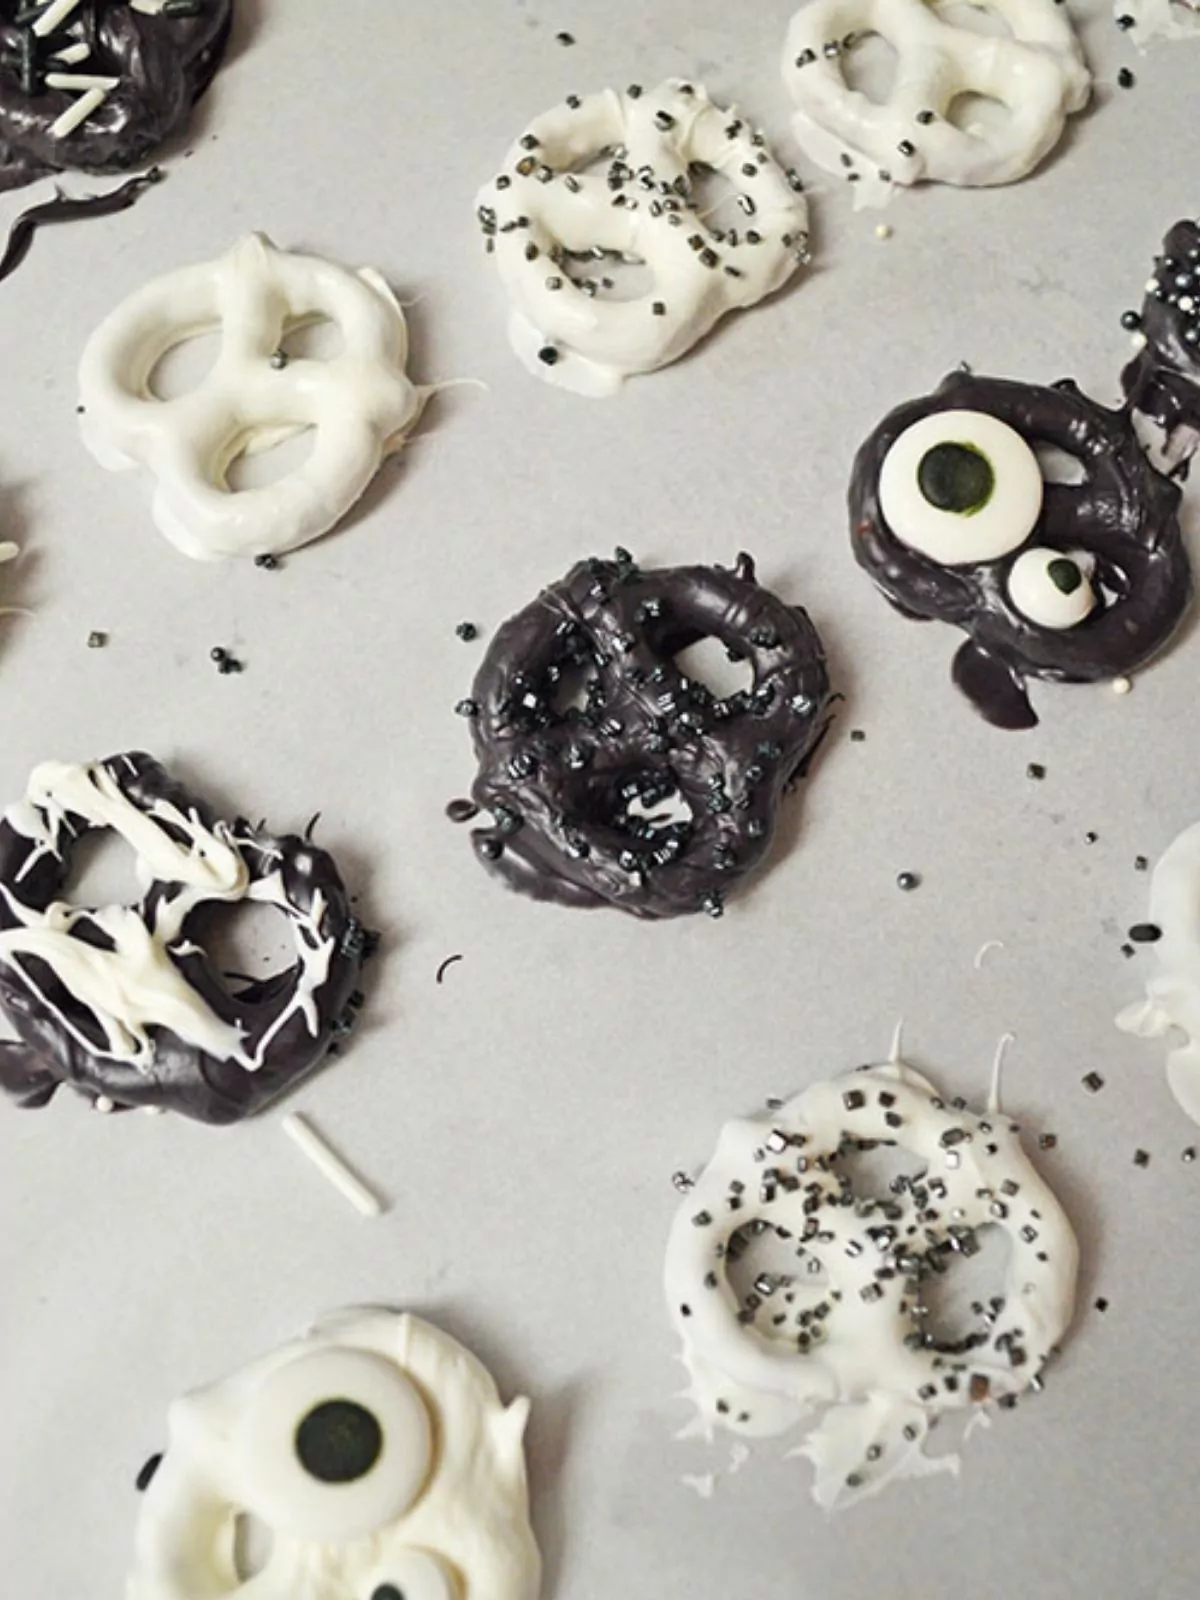 decorated chocolate covered pretzels for Halloween.